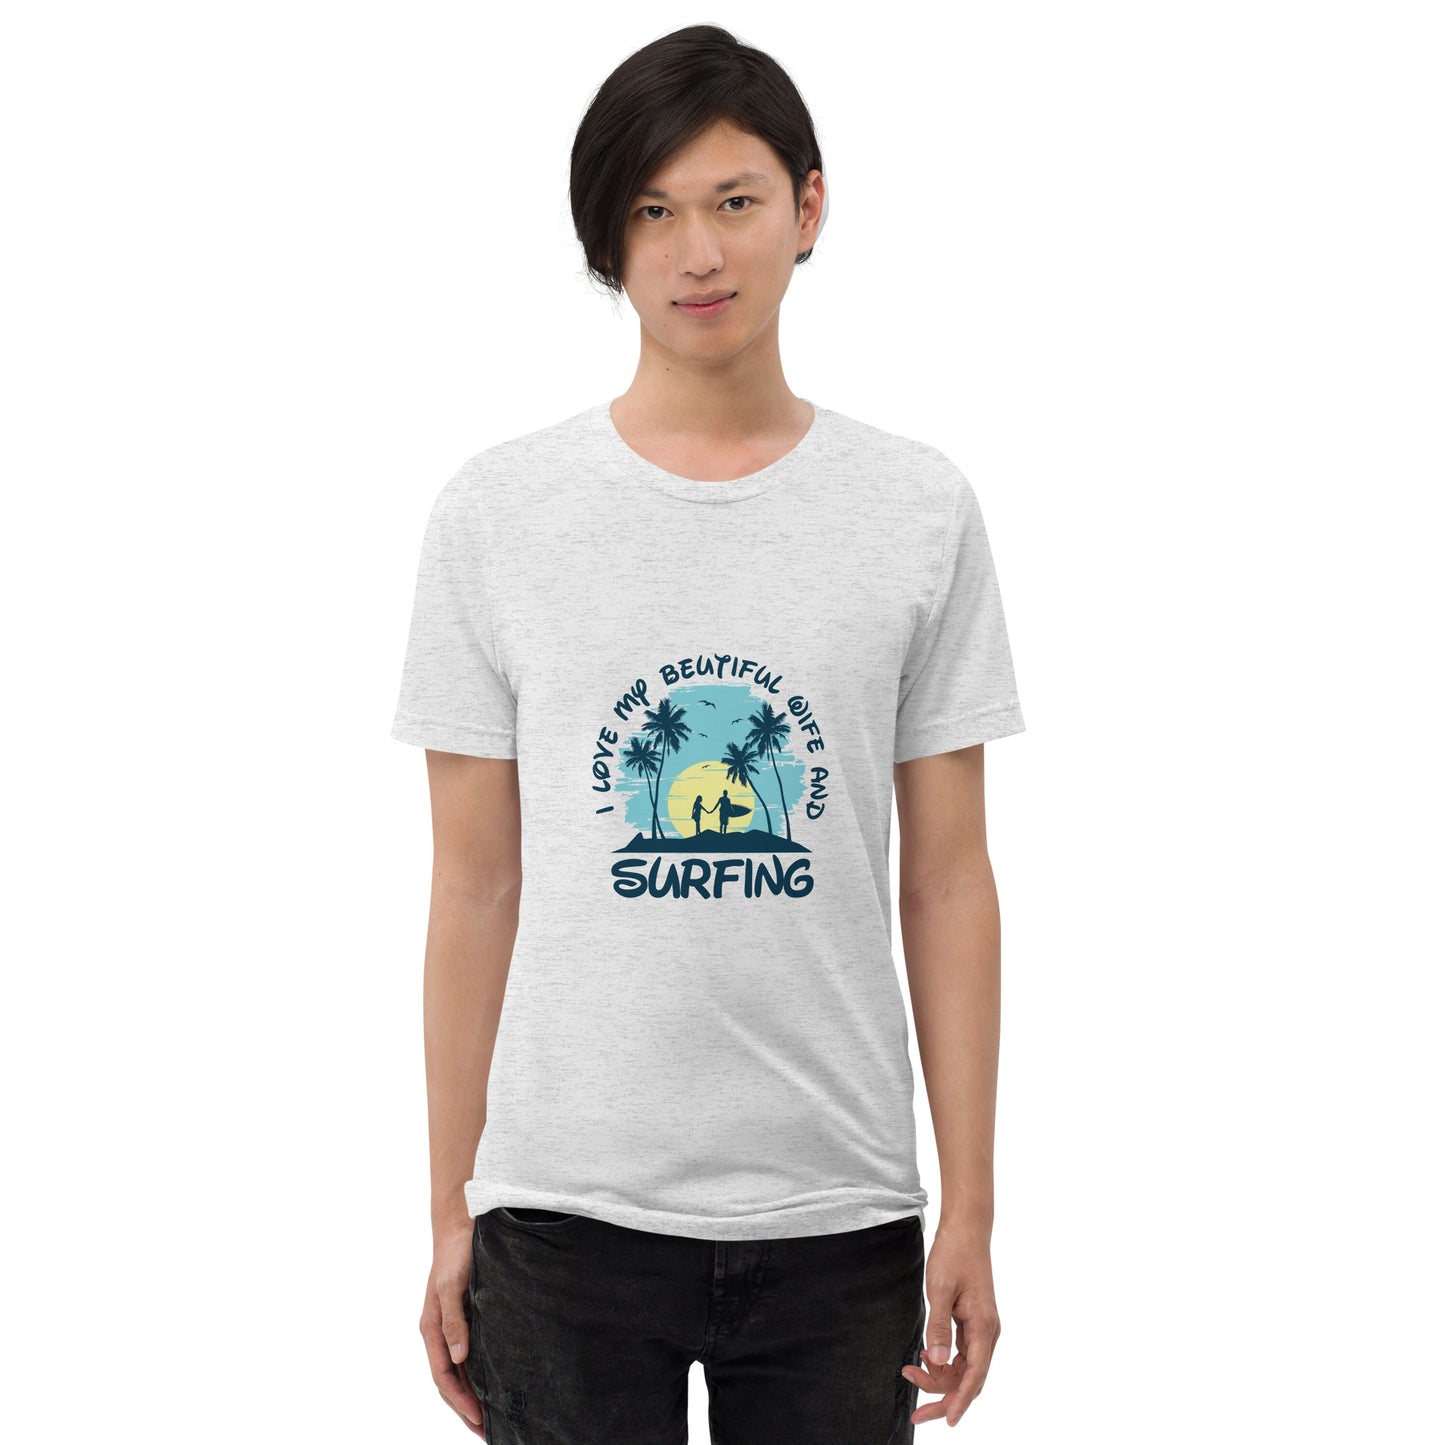 Love wife and surfing - Short sleeve t-shirt - HobbyMeFree